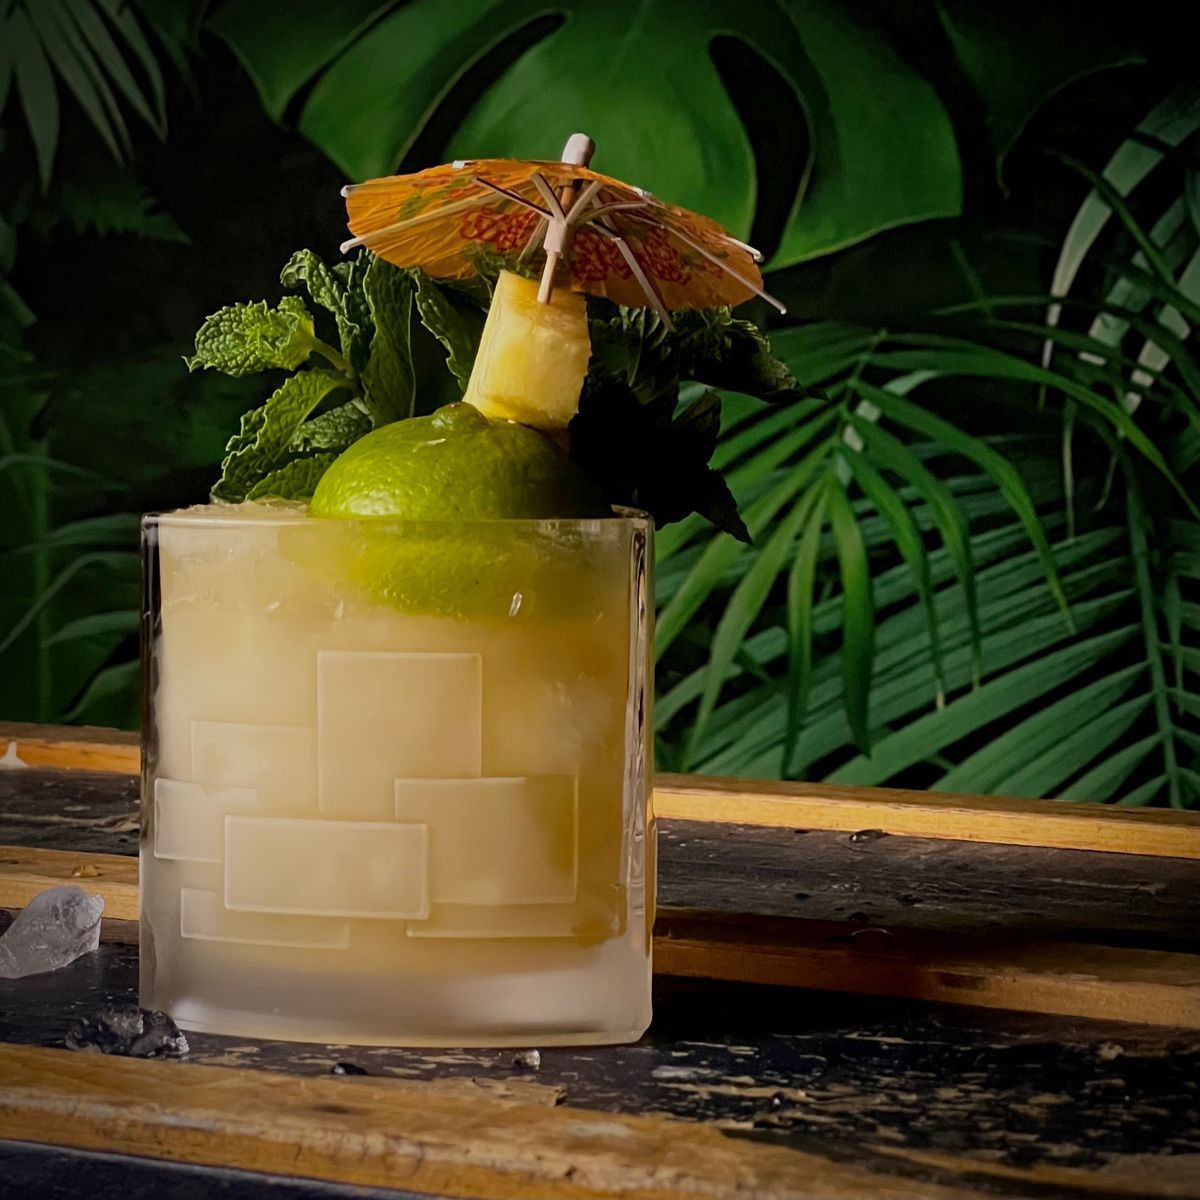 This week’s entry from the Minimalist Tiki Classic Thirty is the Royal Hawaiian Mai Tai—the missing link between the perfect original and the abominations served in bars across the world sharing nothing but the name.

For my modern reimagining, I wanted to jam all of the extra flavours the RH Mai Tai’s 6.5 ounce monster volume in the template of the classic. To achieve this without adding all the extra juices, I made a fantastic syrup with pineapple and citrus peels to capture all those delicious aromatics.

Since that syrup has so much extra tartness from the aforementioned citrus, I dialed the lime juice back just a touch from the usual ounce I’d use in a Mai Tai. Otherwise, the build is very familiar.

My first thought for the name was something related to Kamehameha, the first King of the Hawaiian Islands (the first Royal Hawaiian, ha ha ha), but I figured—correctly—that there were already cocktails named for him. I did some research, and learned that he was known as Paiea when he was born. 

Recommended Brands:
•Appleton Estate Rare Casks 12
•El Dorado 8 Year
•Flor de Caña Extra Dry 4 Year
•Pierre Ferrand Dry Curaçao

ROYAL HAWAIIAN OLEO:

•1 1/2 cup chopped pineapple
•peel of one lemon, chopped
•peel of one lime, chopped
•peel of one large orange, chopped
•sugar (approx 375g)

Combine pineapple and peels in a large bowl. Weigh it, and cover with an equal amount of sugar by weight. Stir to combine. Cover and let rest for up to 24 hours, stirring regularly, until all sugar has dissolved. Strain and bottle.